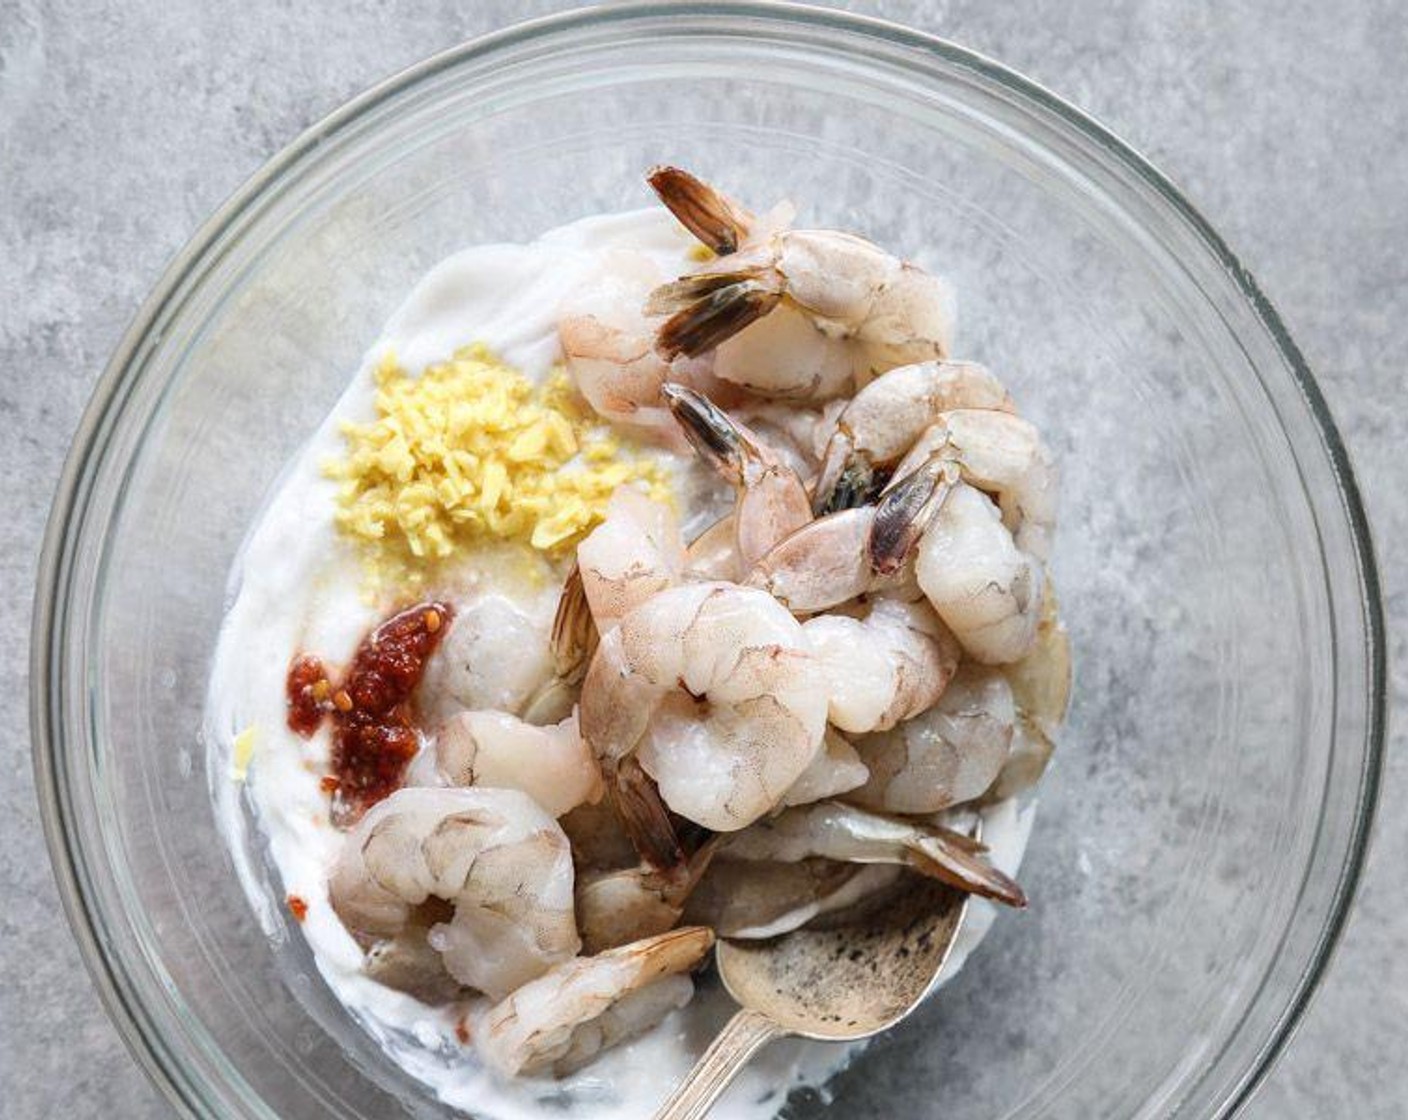 step 2 In a large mixing bowl, toss the Shrimp (1 lb), Fresh Ginger (2 Tbsp), Coconut Cream (1 cup), juice from Limes (2), Sambal (1 tsp), and 1/2 teaspoon Sea Salt (to taste) until combined.